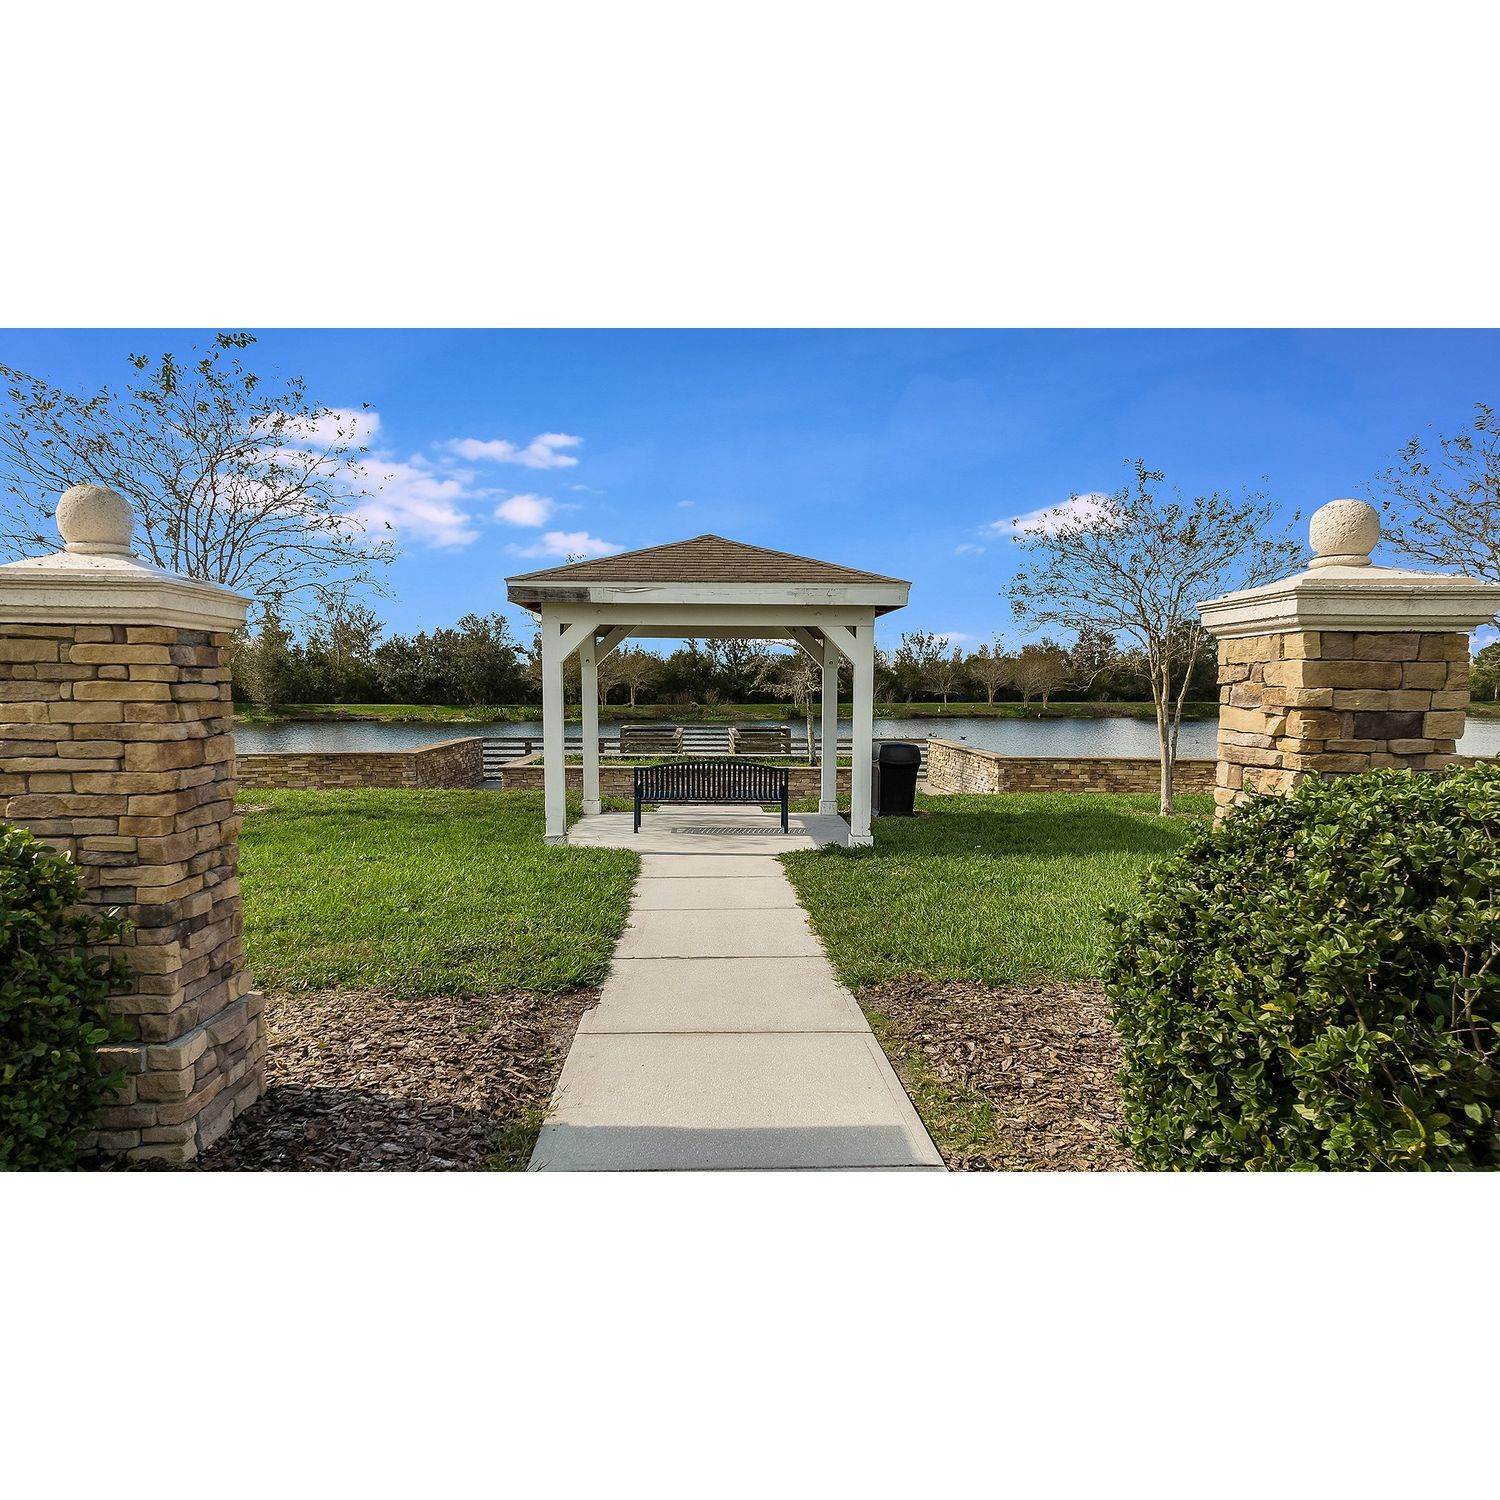 45. The Townhomes at Anthem Park Gebäude bei 4590 Calvary Way, St. Cloud, FL 34769